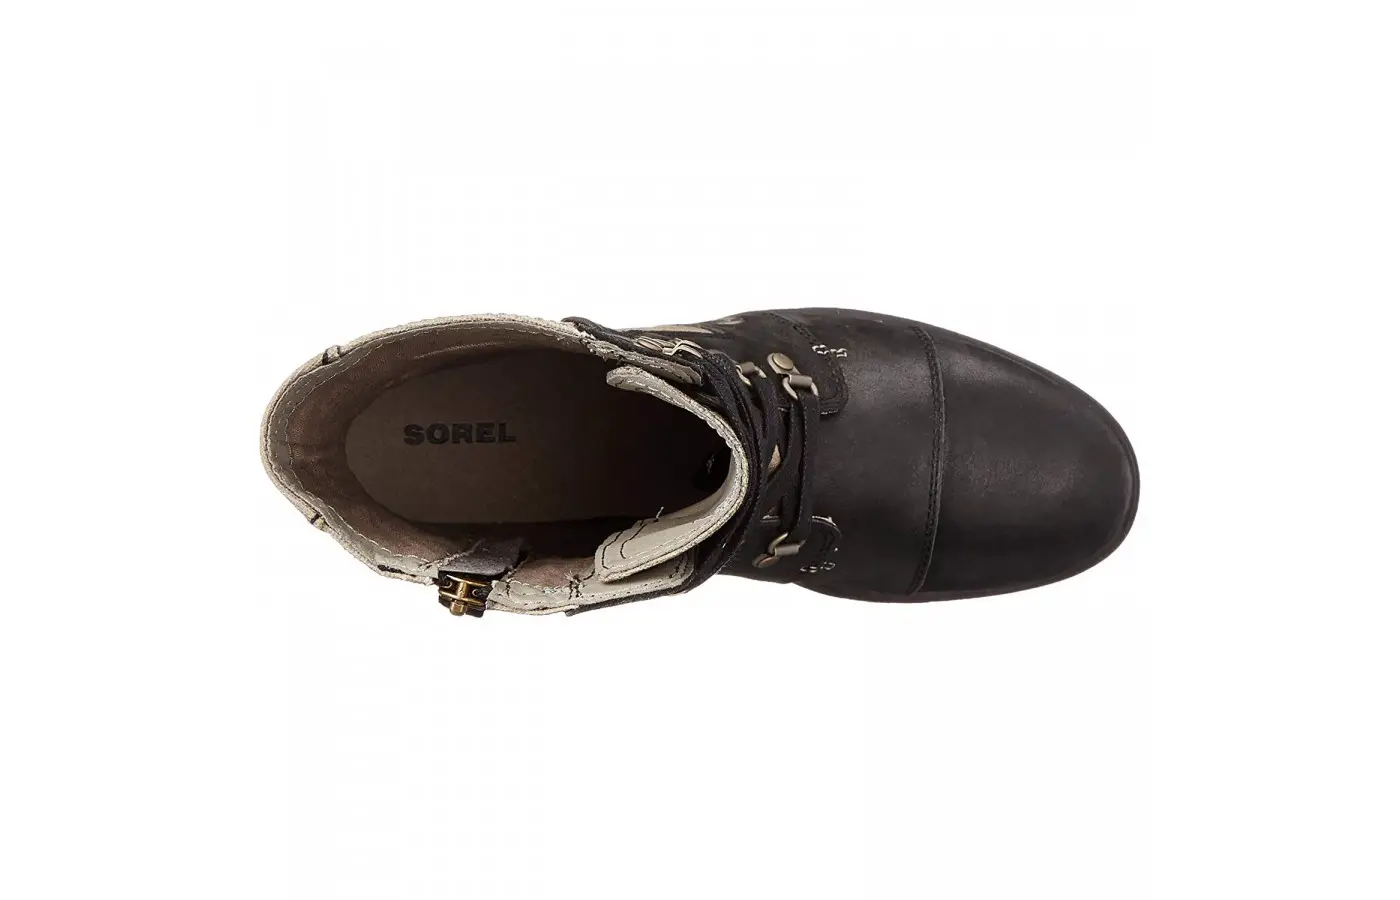 The Sorel Major Carly offers both a lacing and zipper closure system for style and ease.